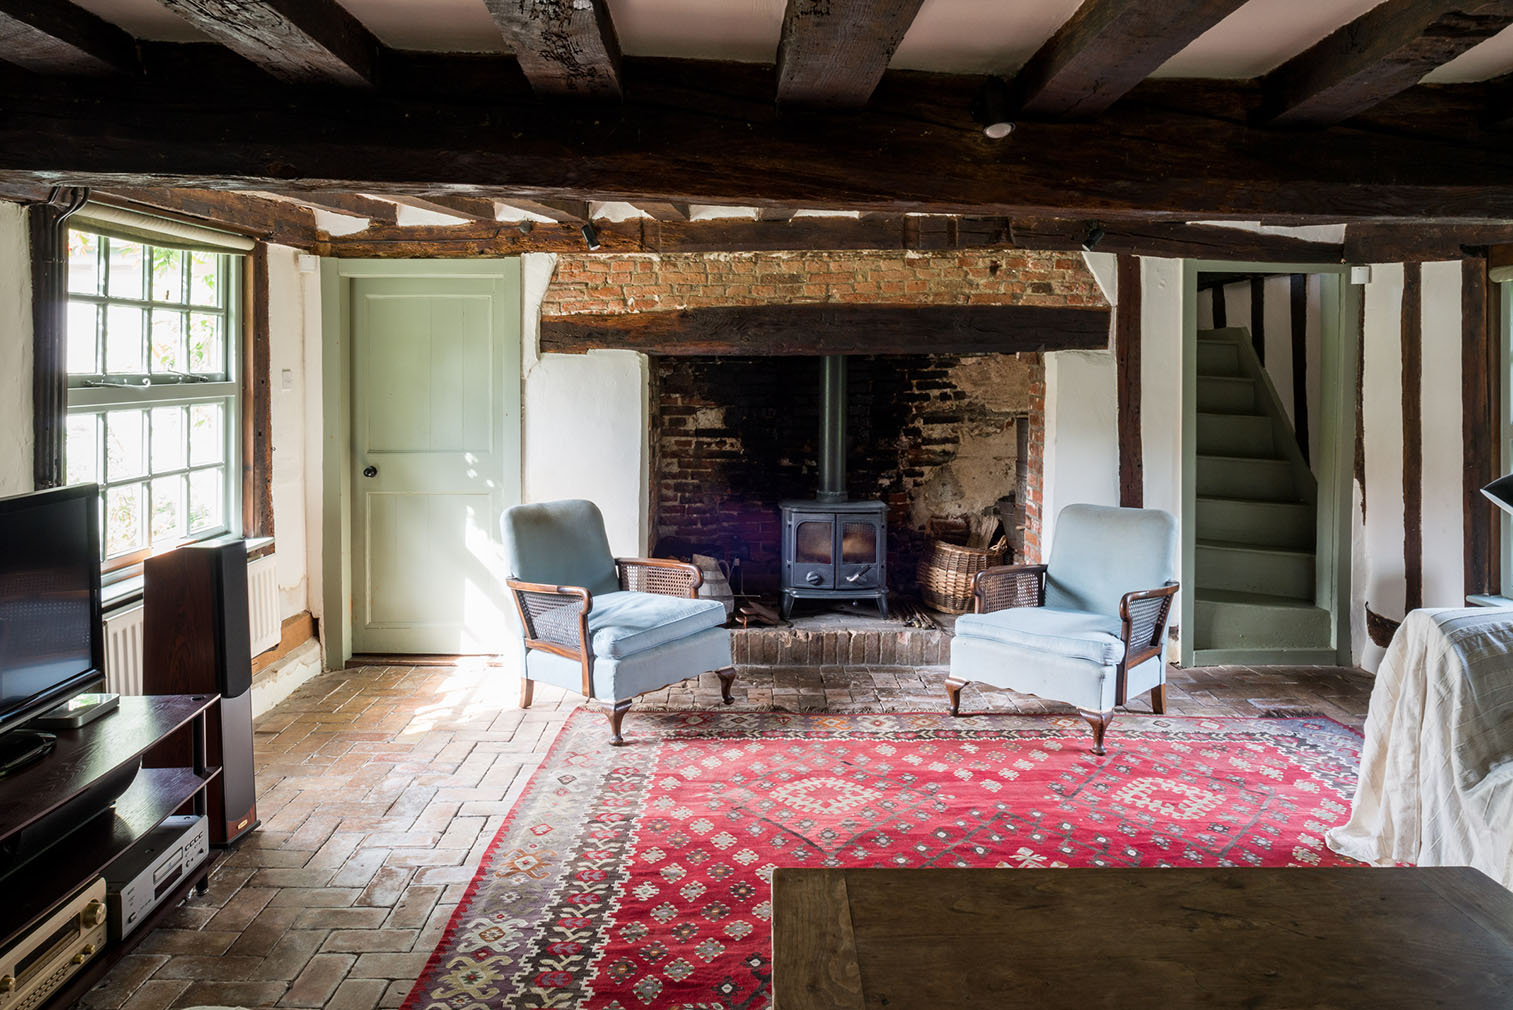 Suffolk property with a converted barn